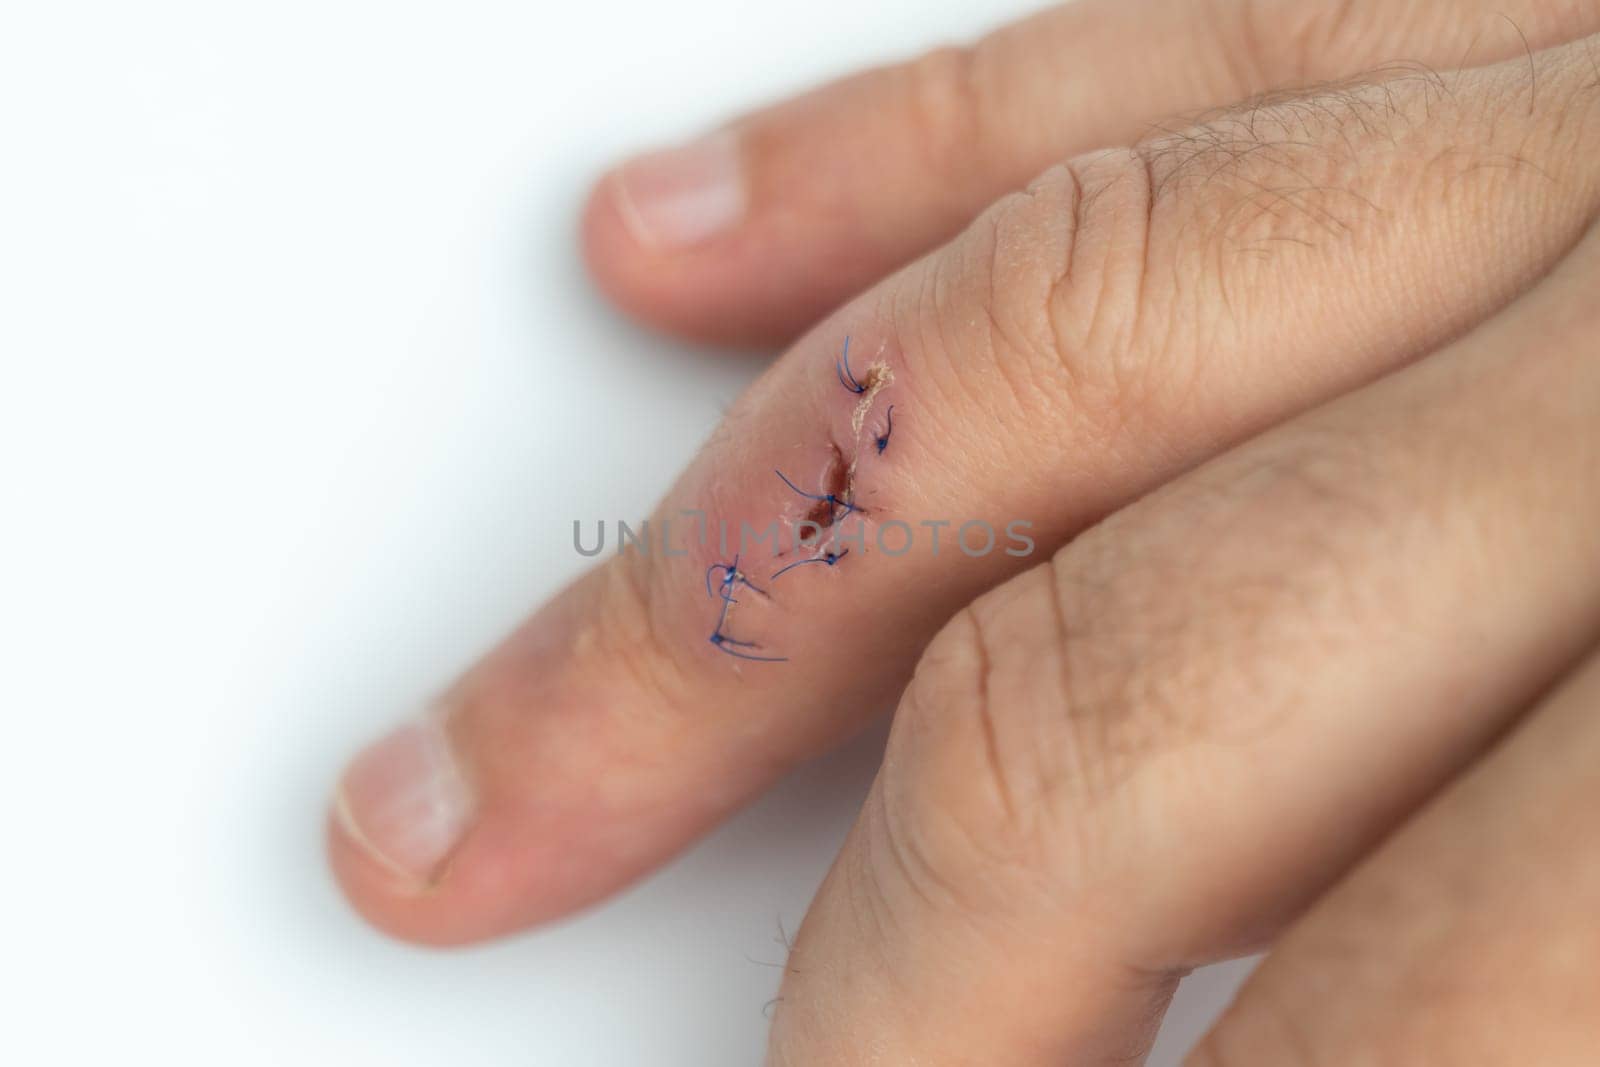 Stitched wound on a finger. Hand with a stitched cut wound